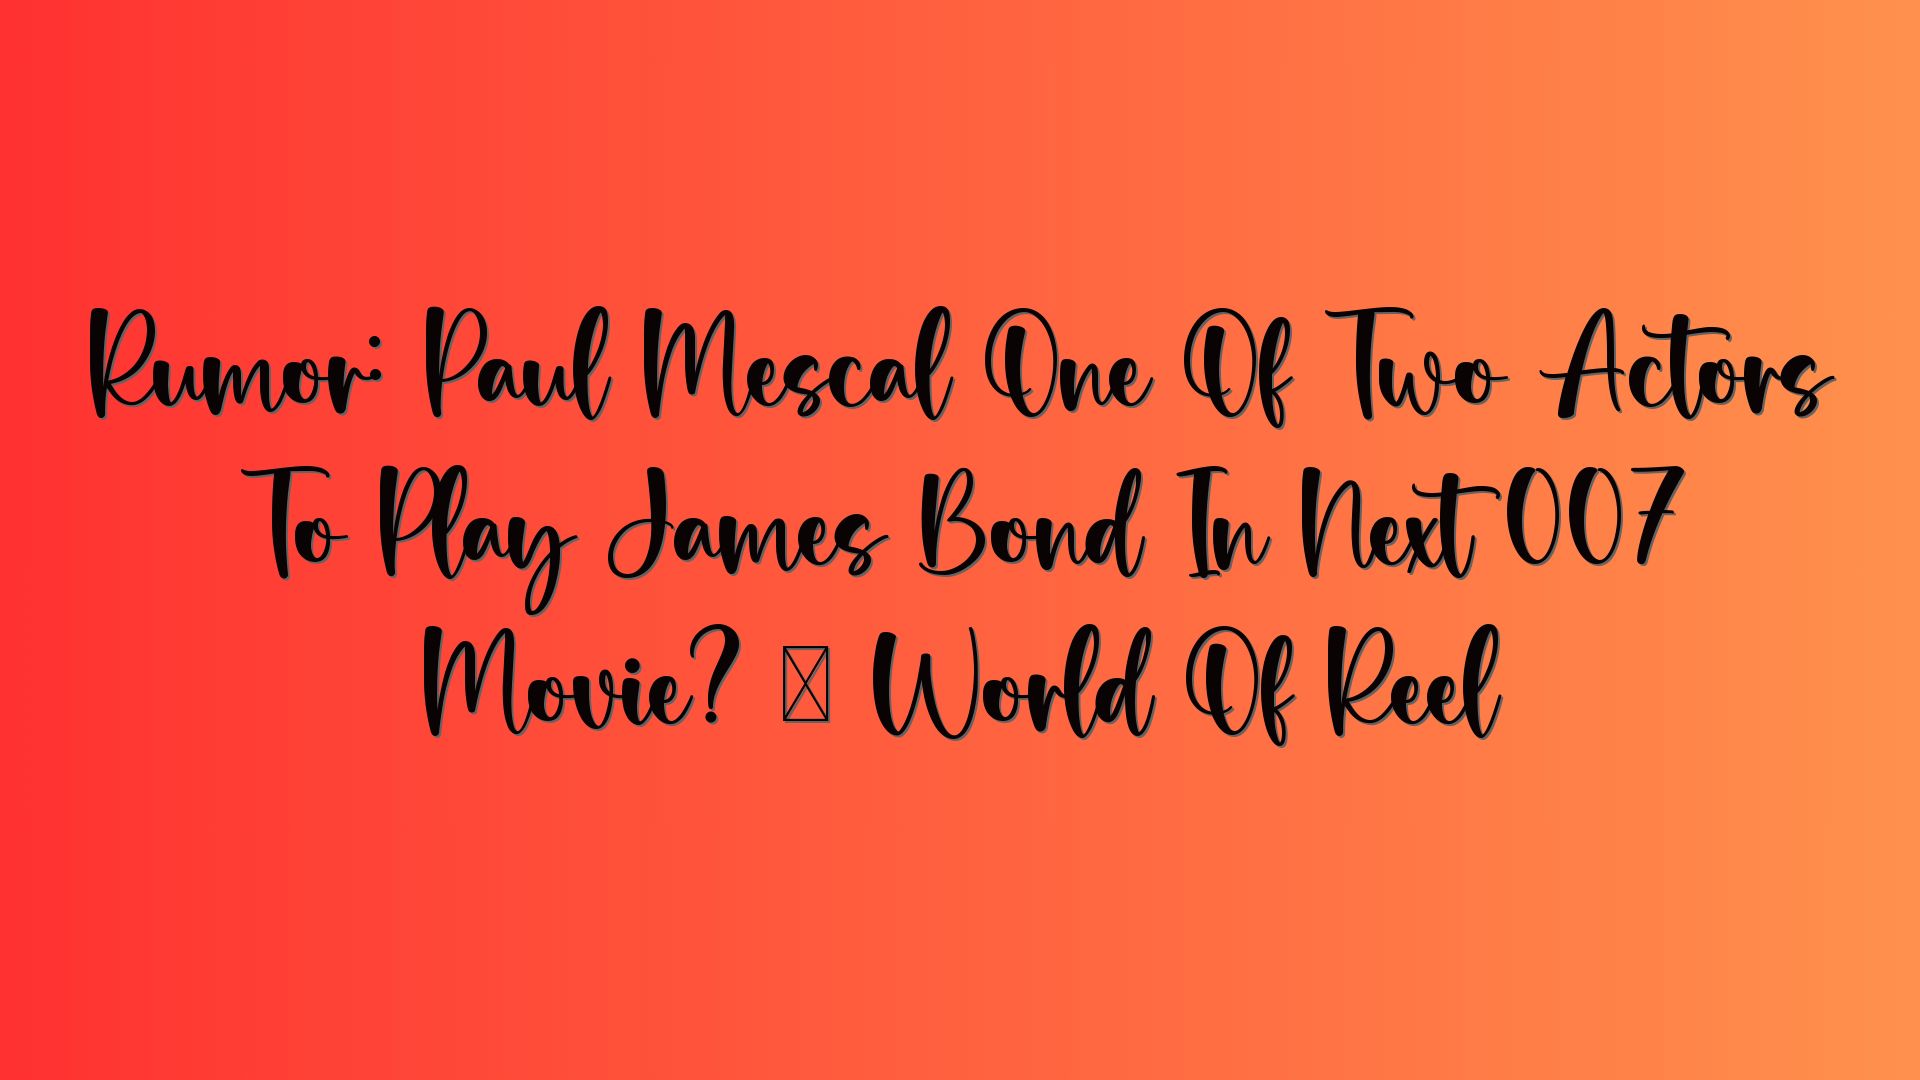 Rumor: Paul Mescal One Of Two Actors To Play James Bond In Next 007 Movie? — World Of Reel